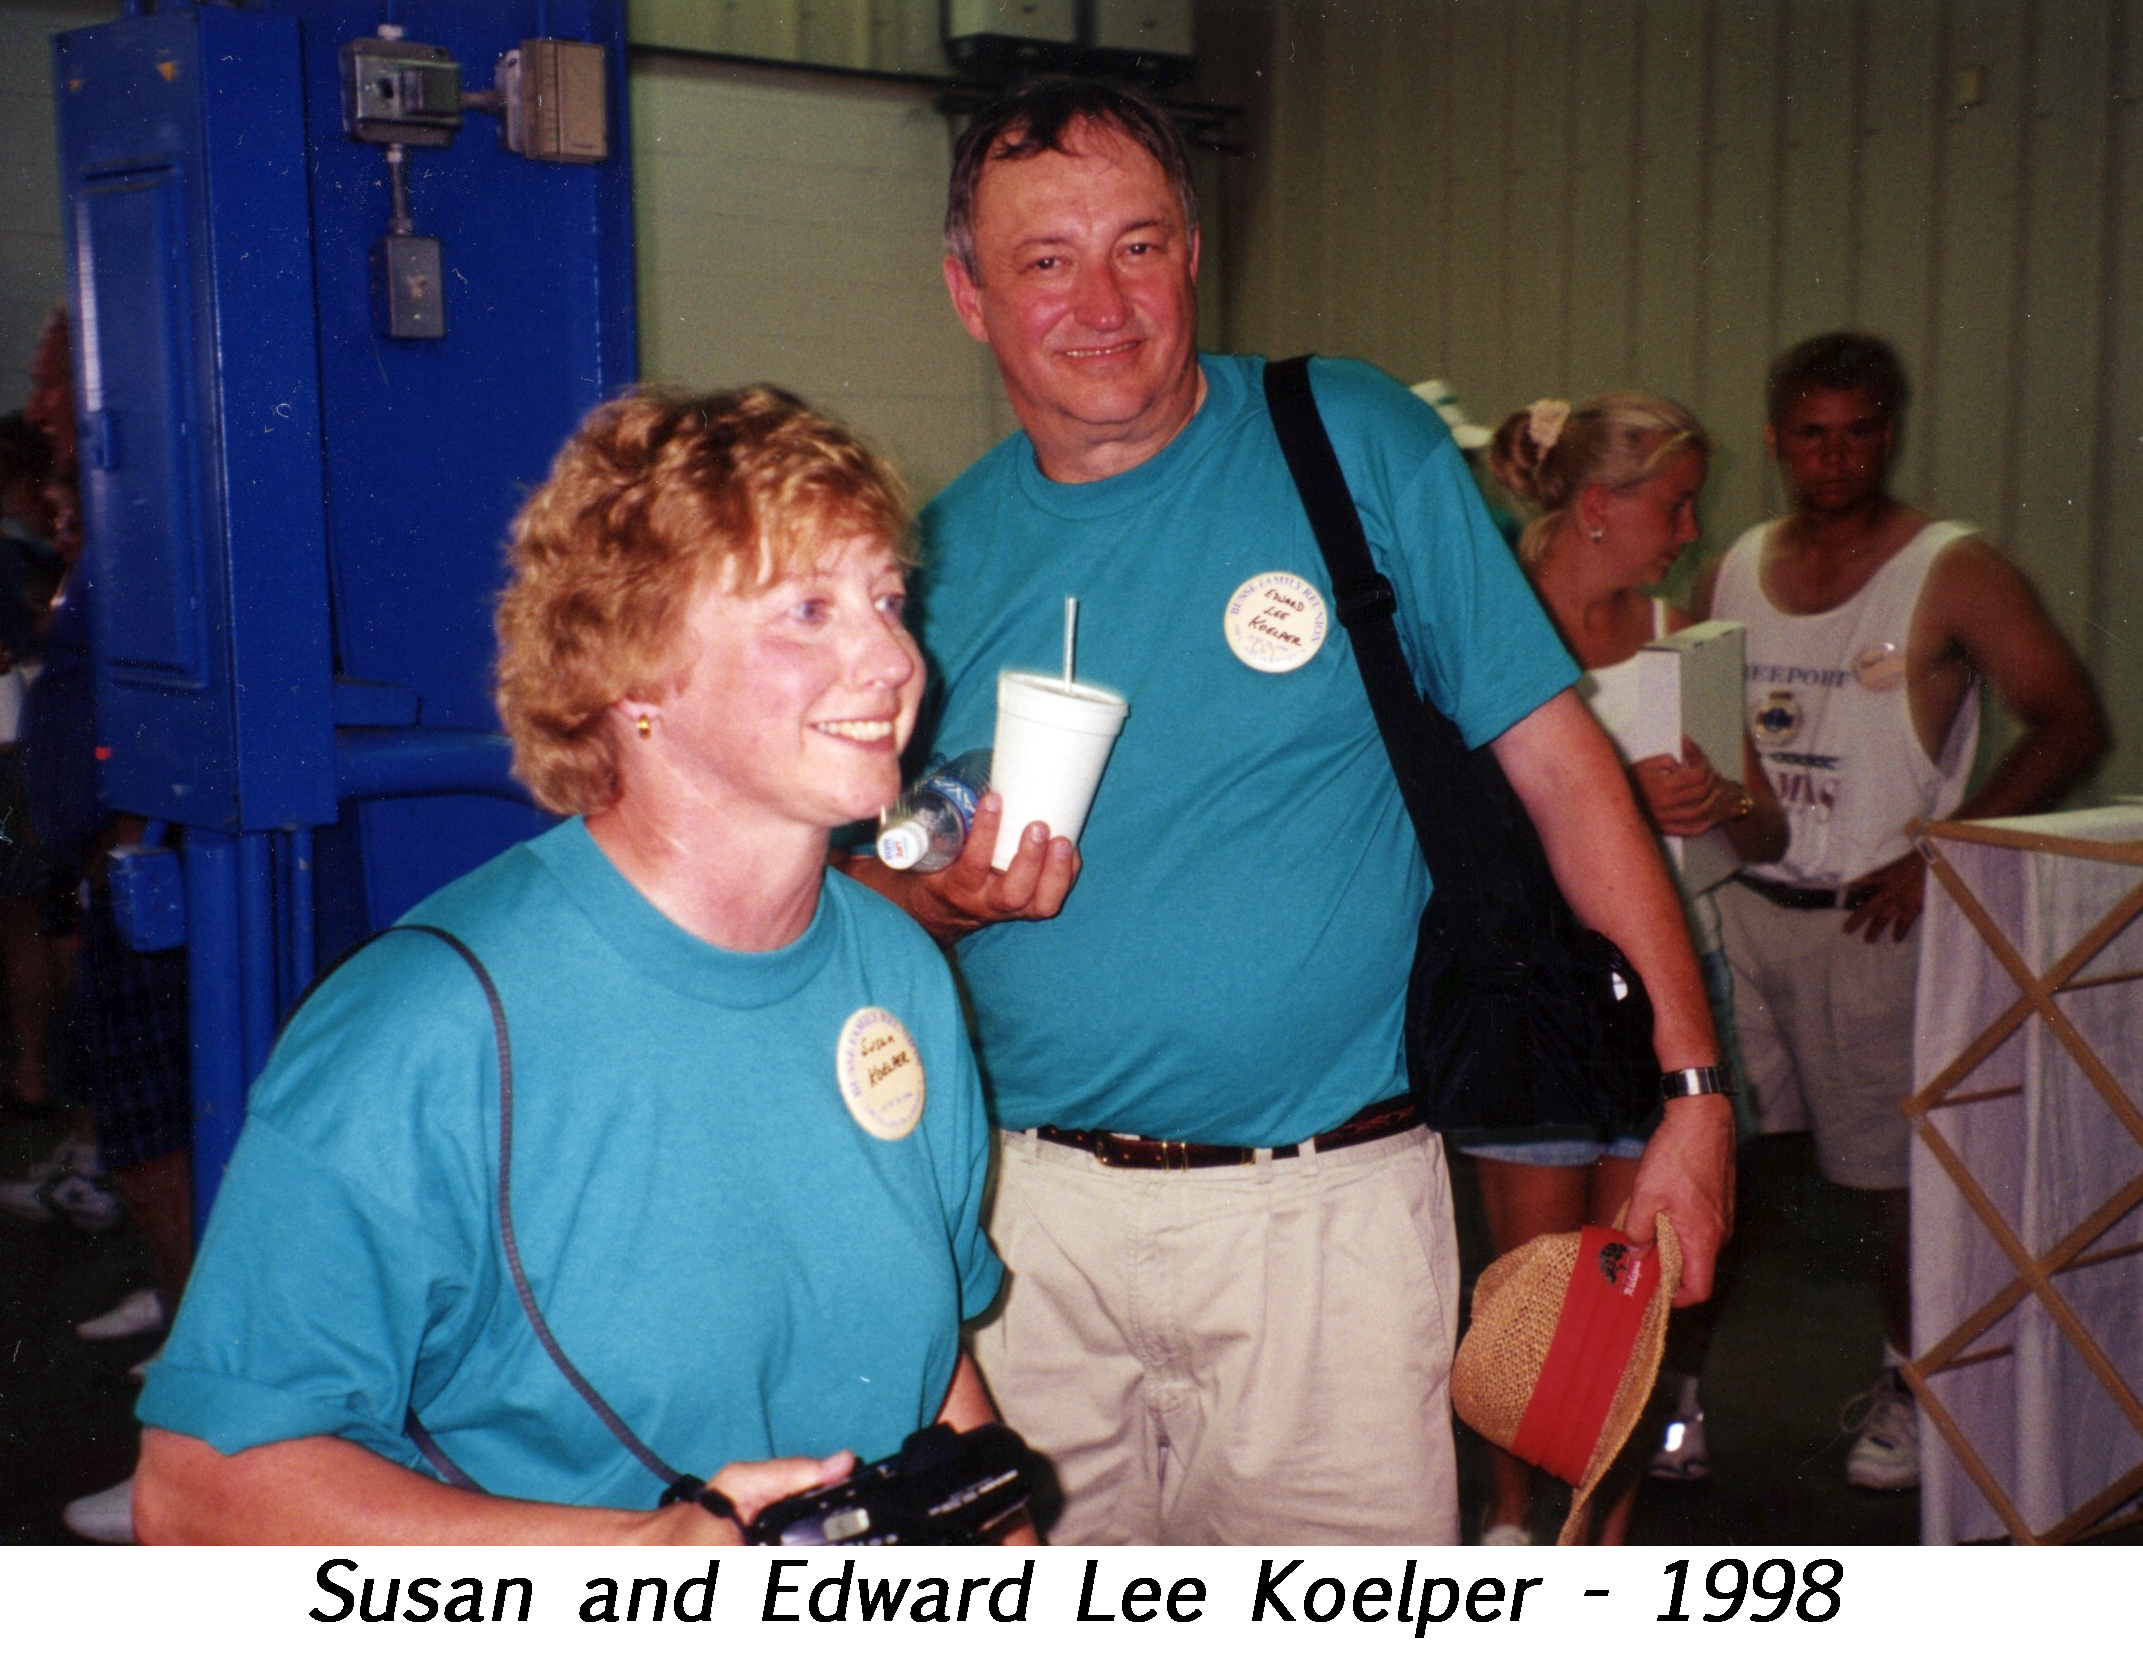 Susan and Edward Lee Koelper are standing together